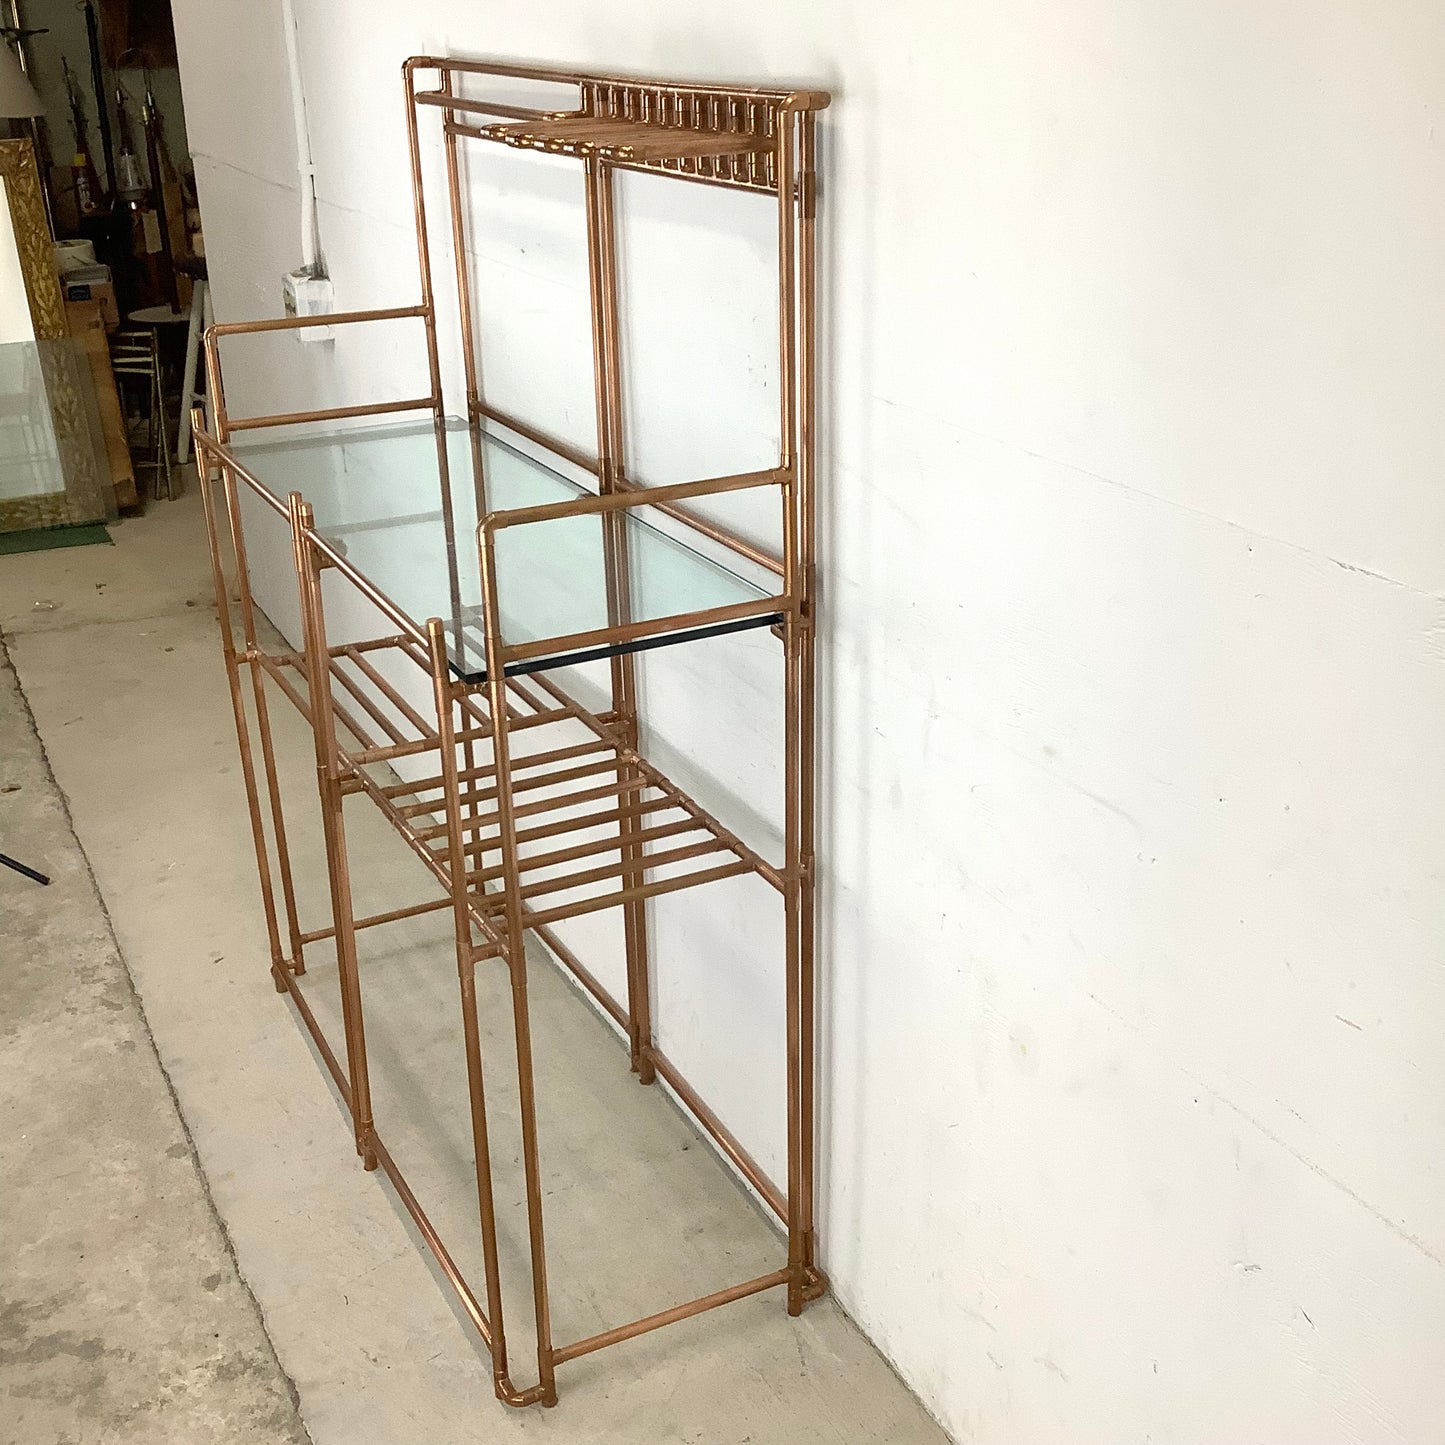 Unique Copper Pipe Baker's Rack with Glass Counter